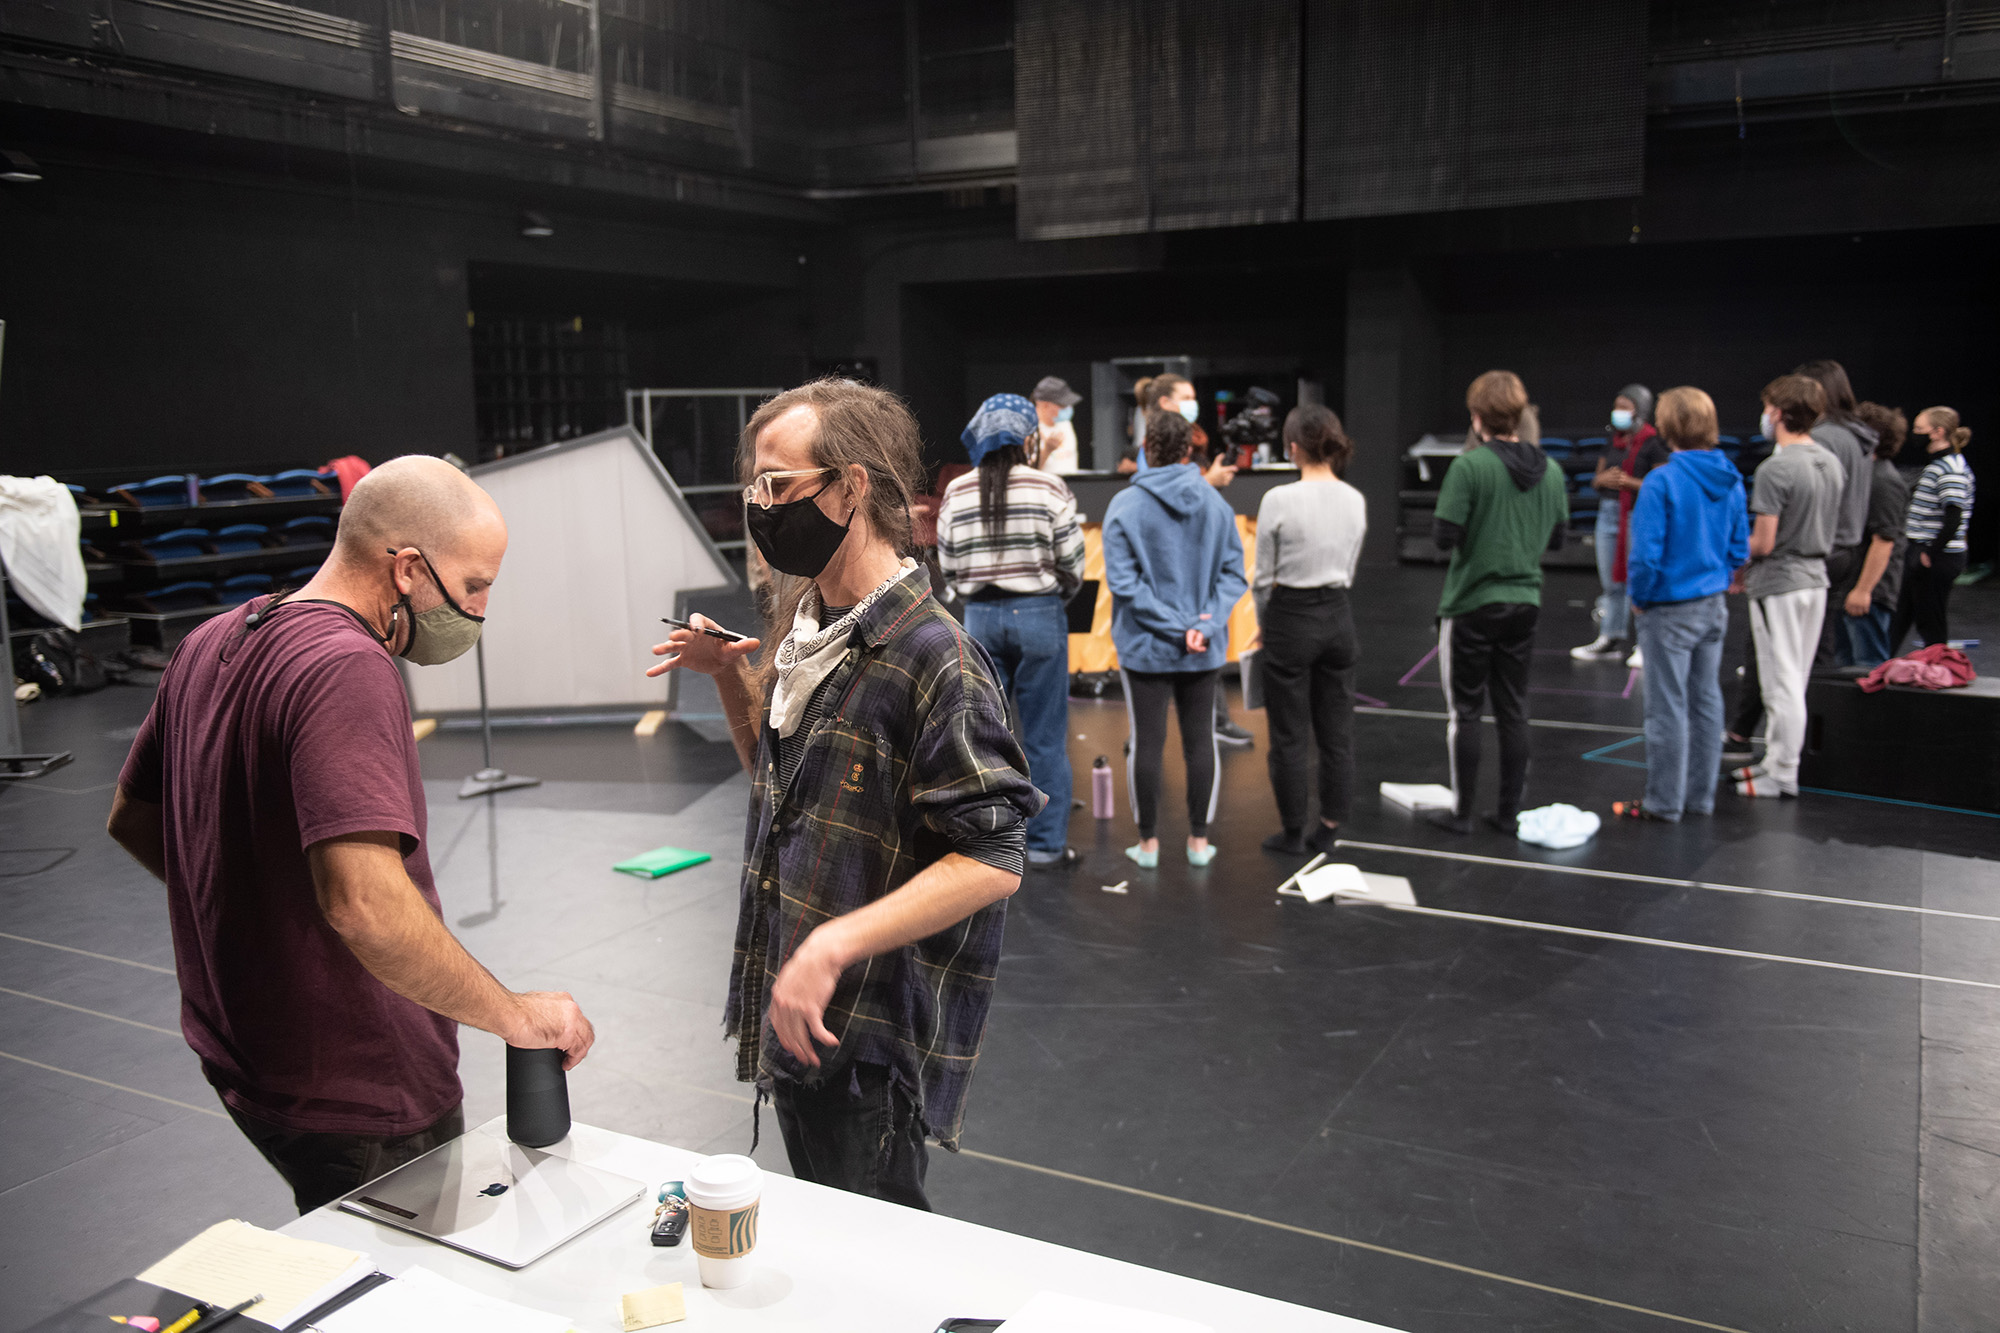 Iowa Playwrights Workshop graduate Dakota Parobek (foreground, right) speaks with director Paul Kalina on the set of Smile Medicine, written by Parobek and part of the University of Iowa's Mainstage 2021-22 theater season